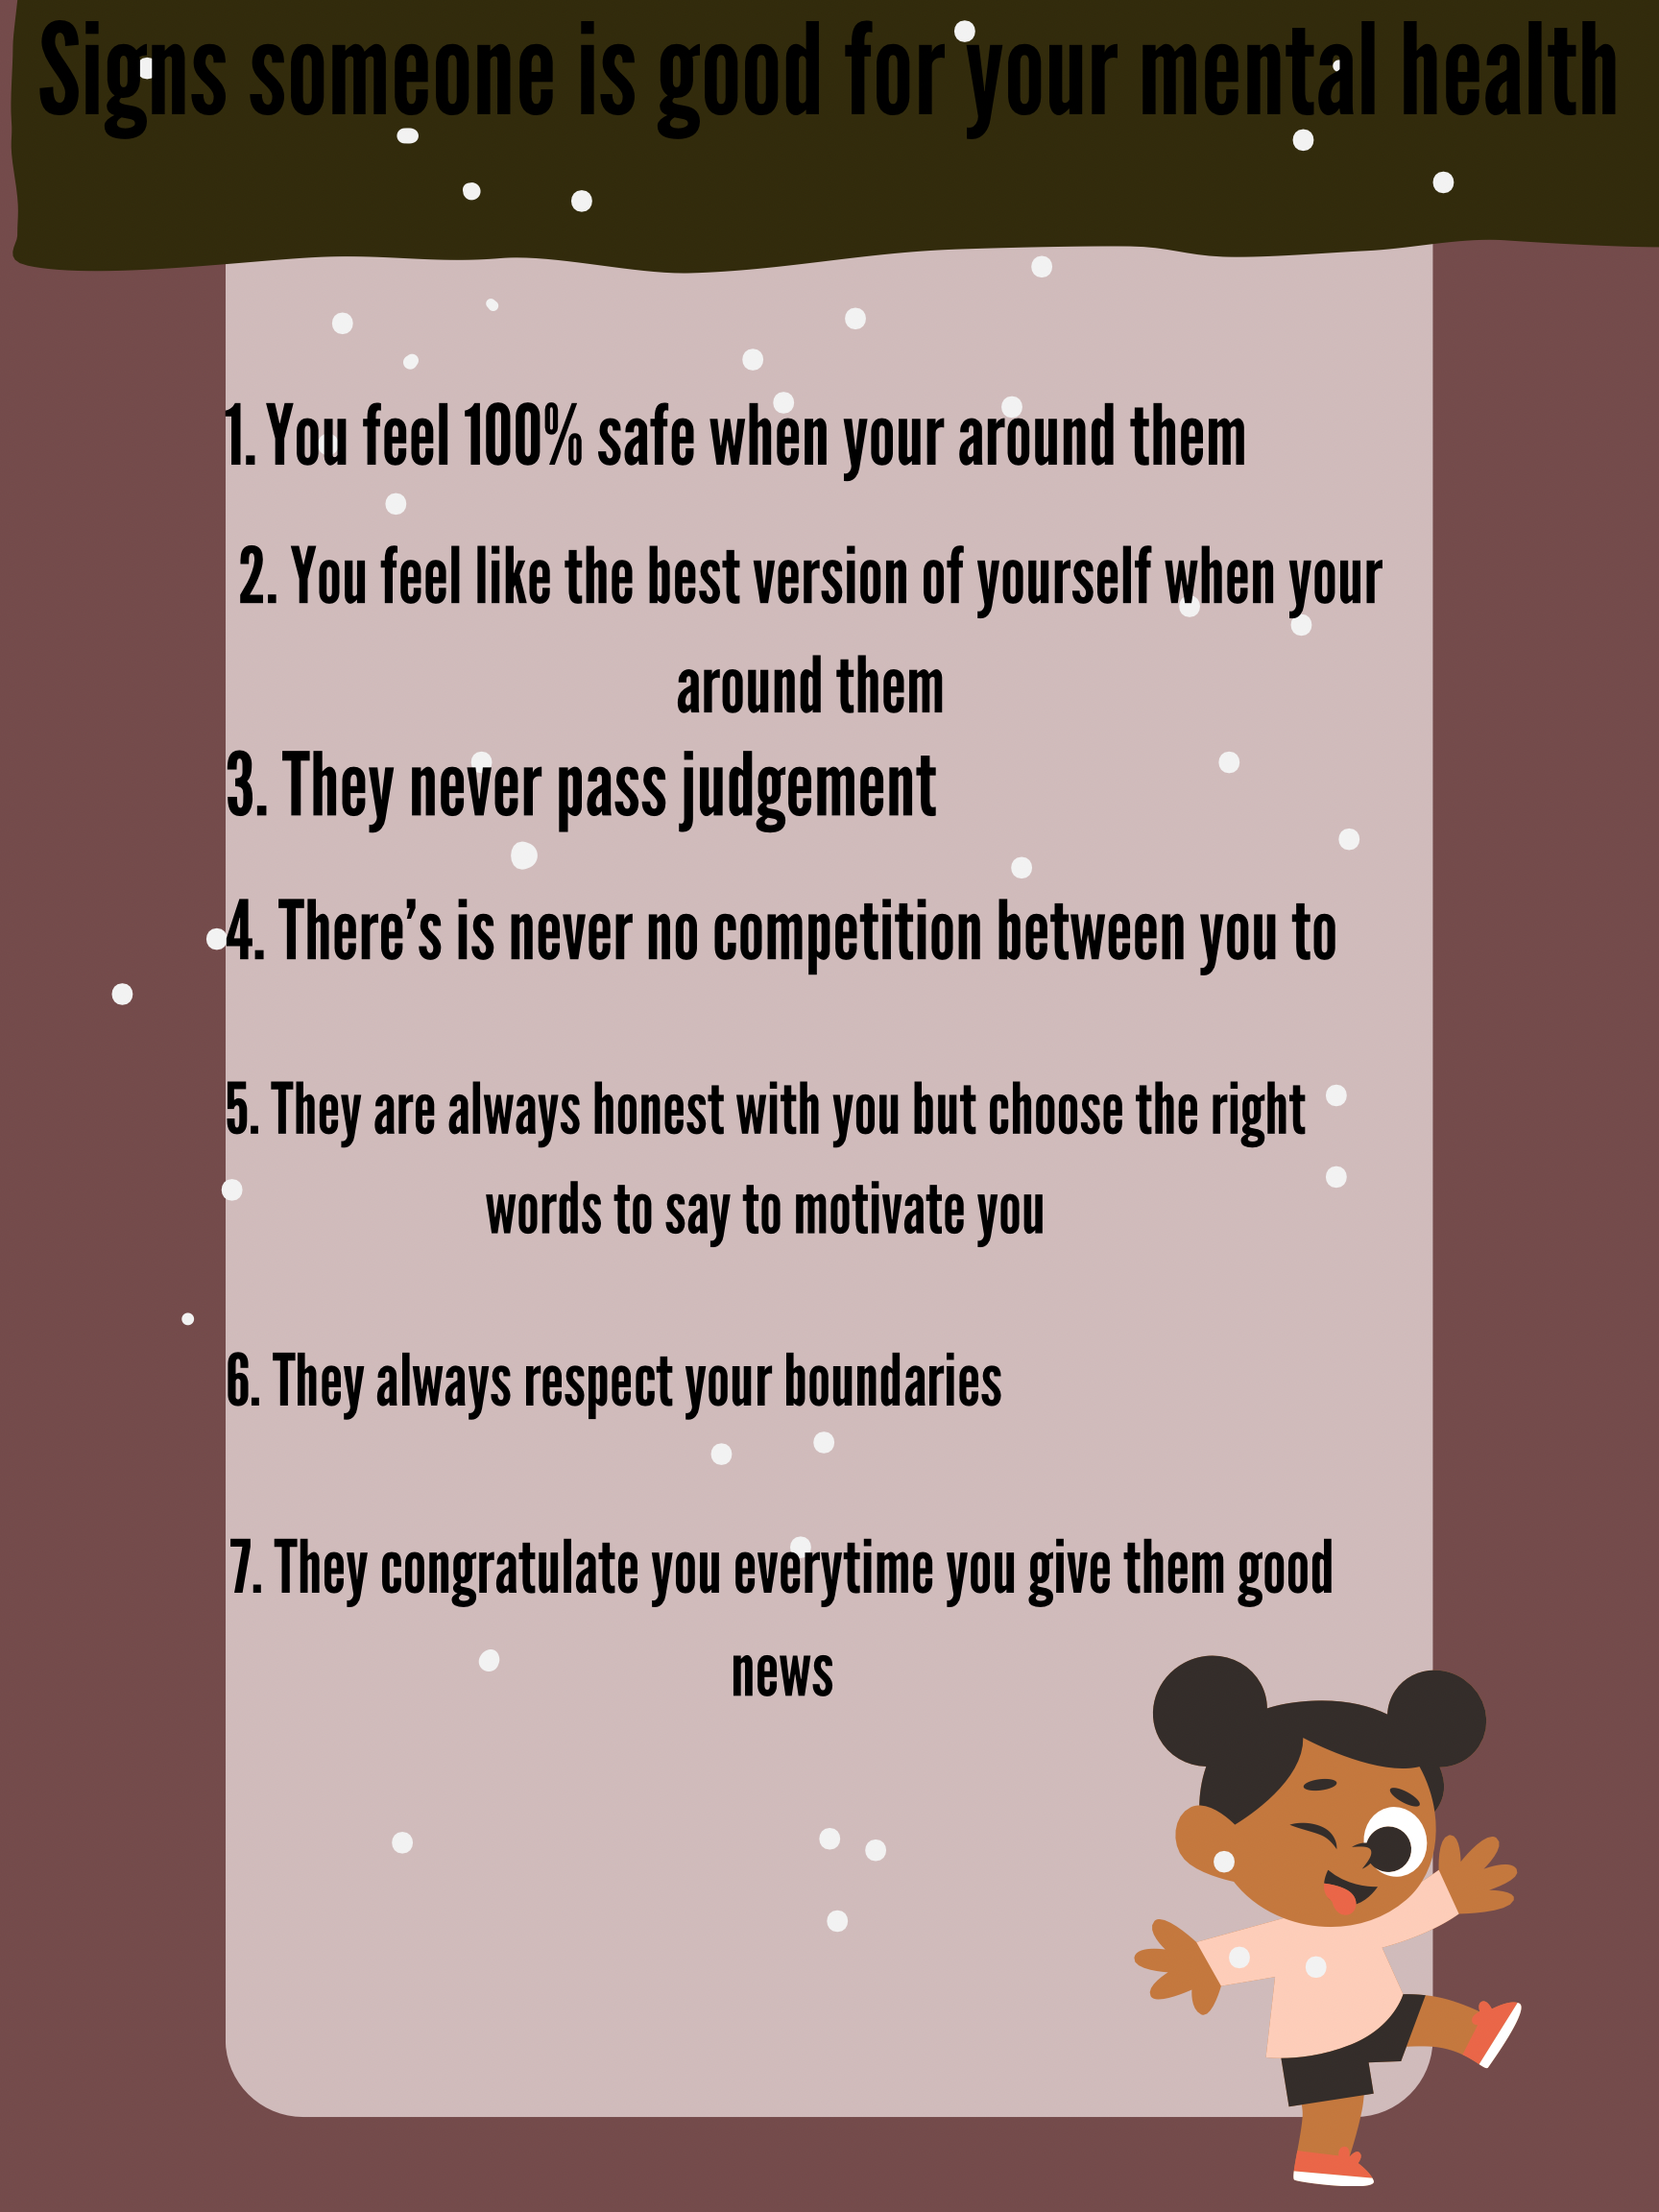 Signs someone is good for your mental health